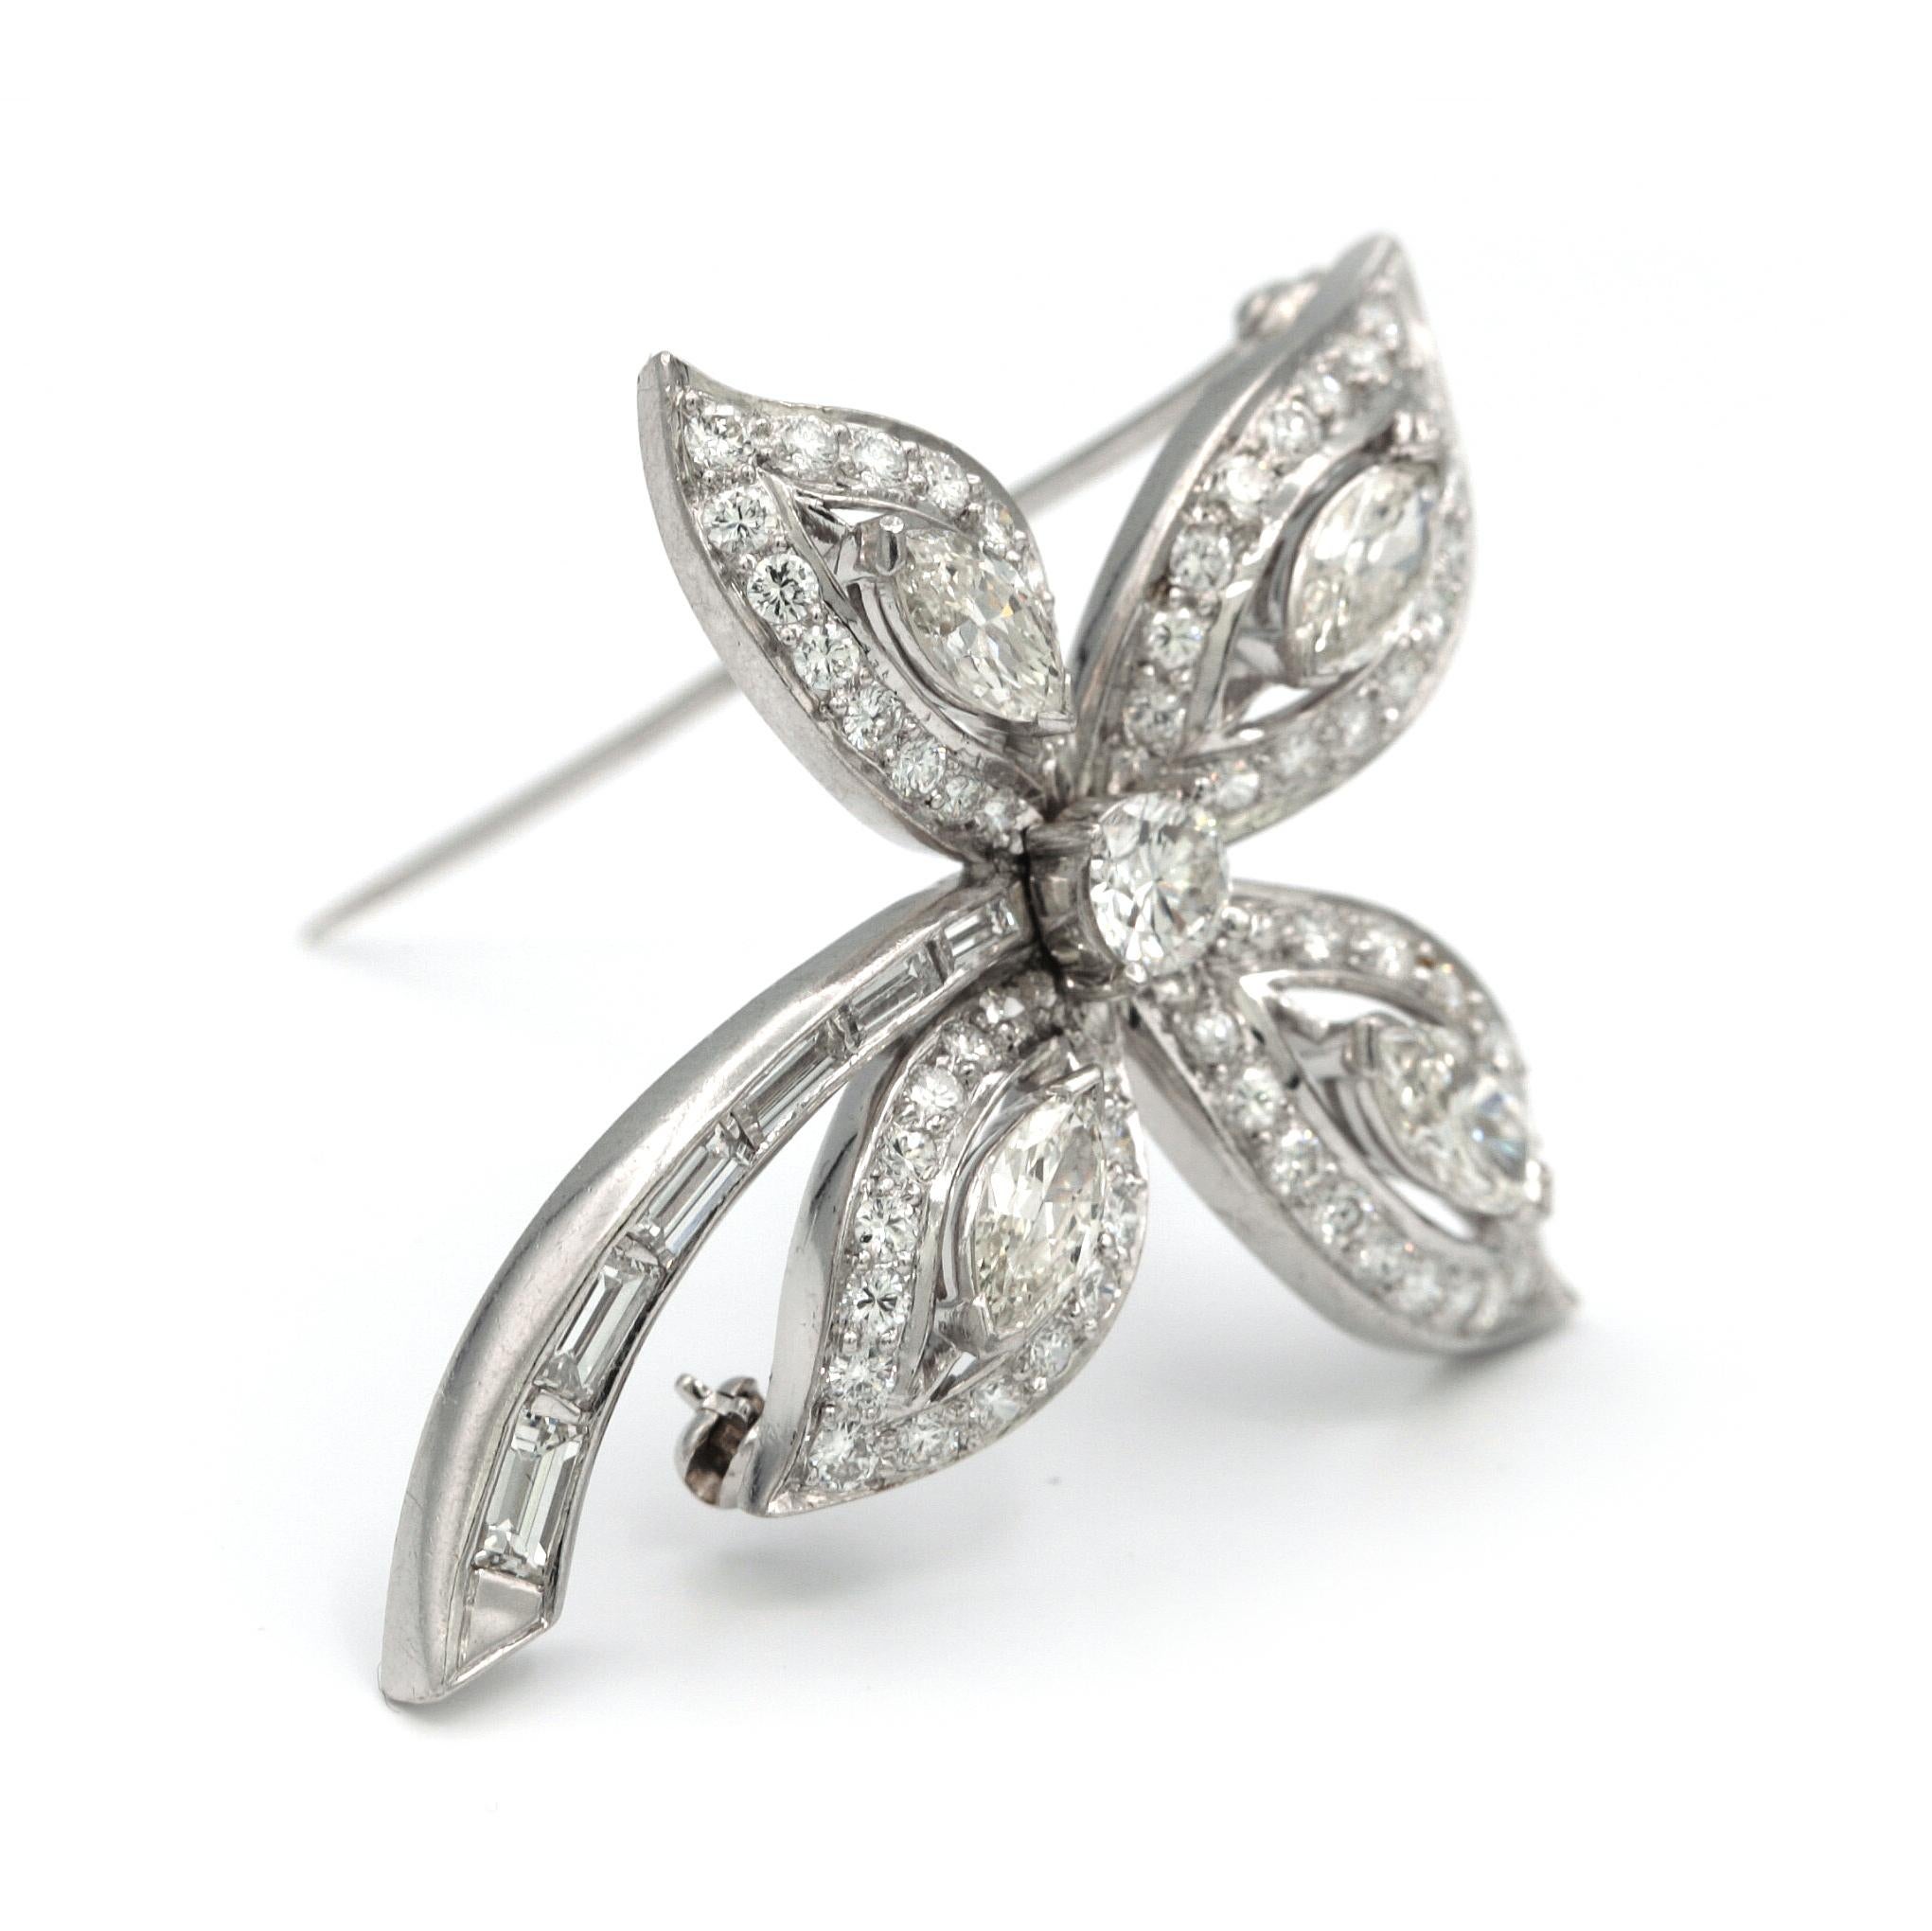 Platinum Flower shaped brooch, with center round diamond Set with 4.41 carats of white diamonds, including 4 marquise shaped stones, 1 round shape, 6 rectangular cut stones, along with 61 pave stones.
Has a length of 4.3cm and a width of 4cm
Weights